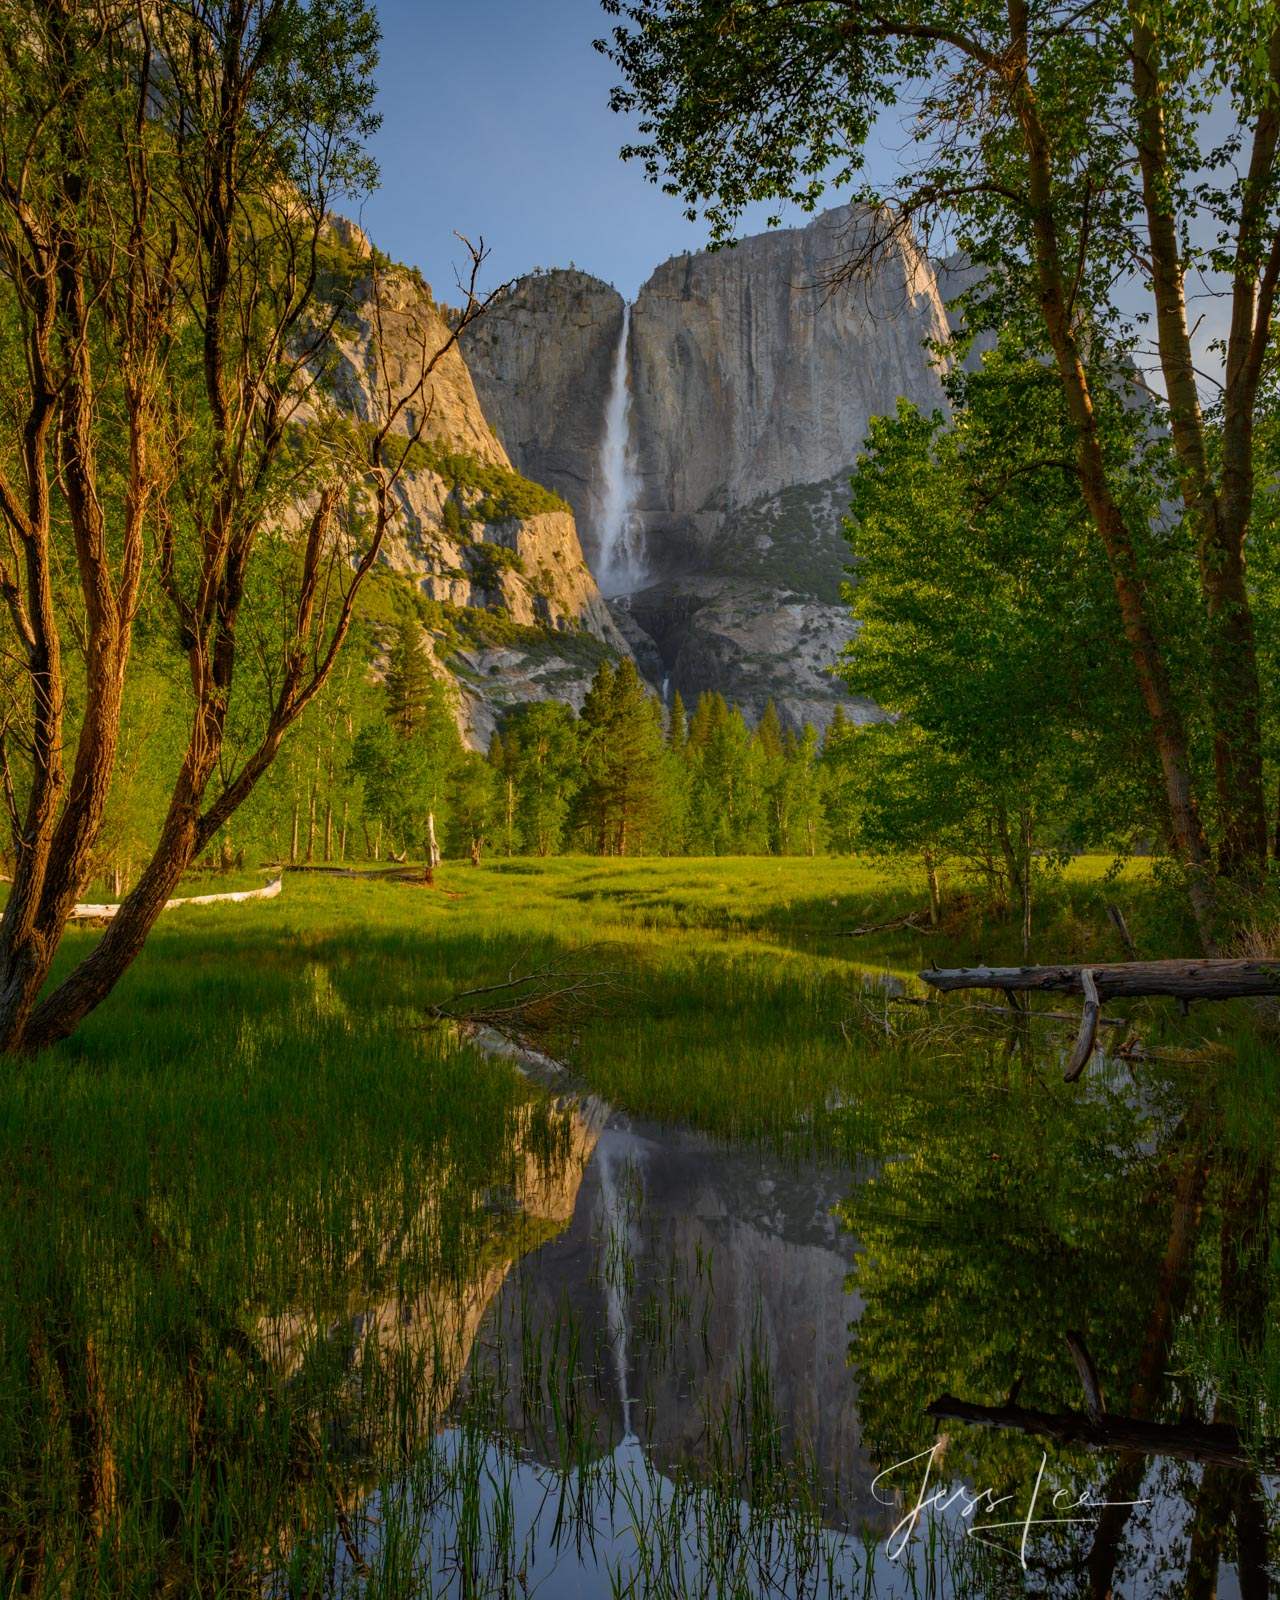 &lt;h2 style="text-align: center;"&gt;Fine Art Limited Edition Photography Print of Yosemite Falls Reflection.&lt;/h2&gt; &lt...